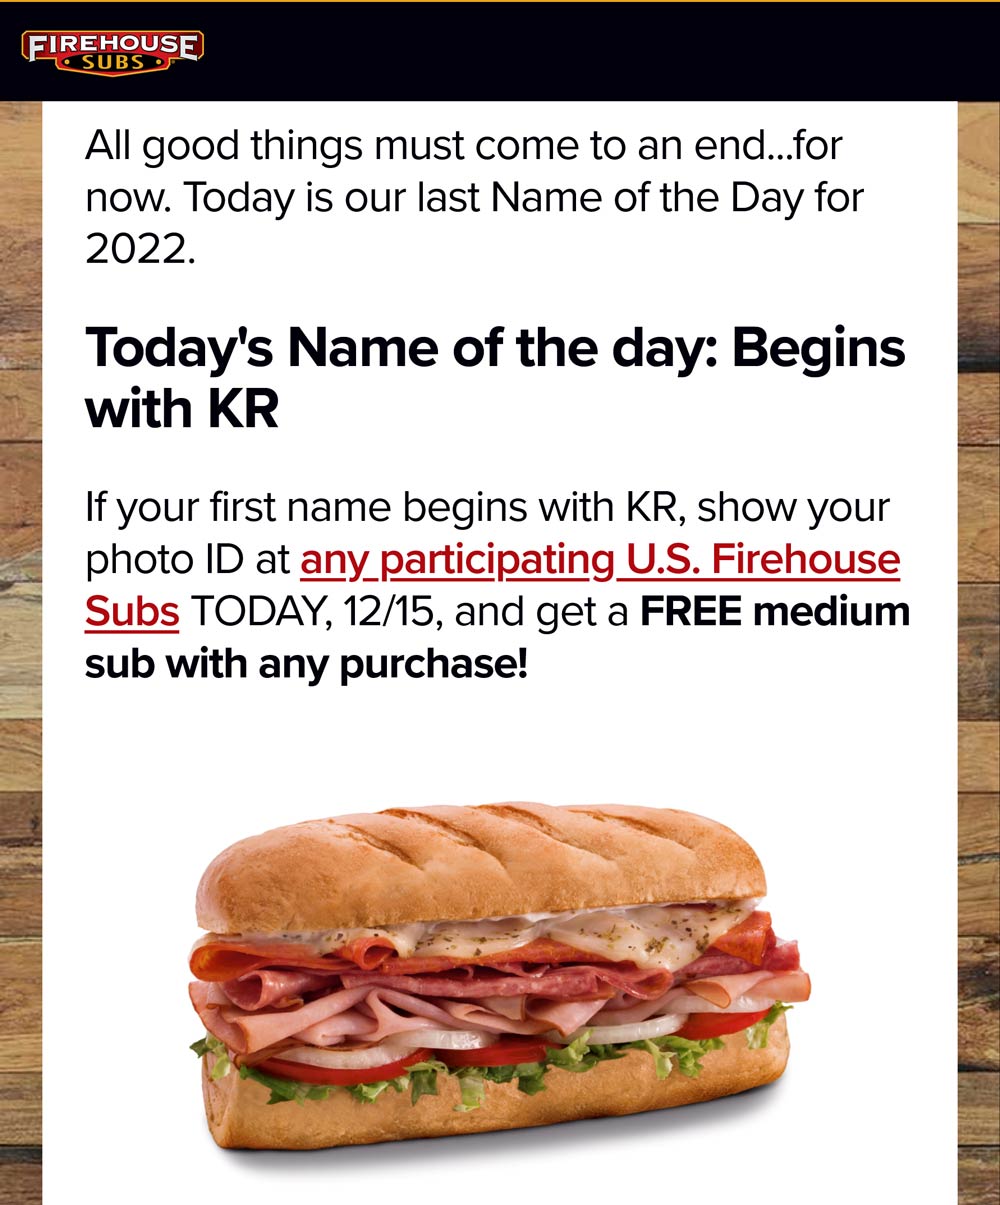 Firehouse Subs restaurants Coupon  Anyone with name begins with KR enjoys a free sandwich today at Firehouse Subs #firehousesubs 